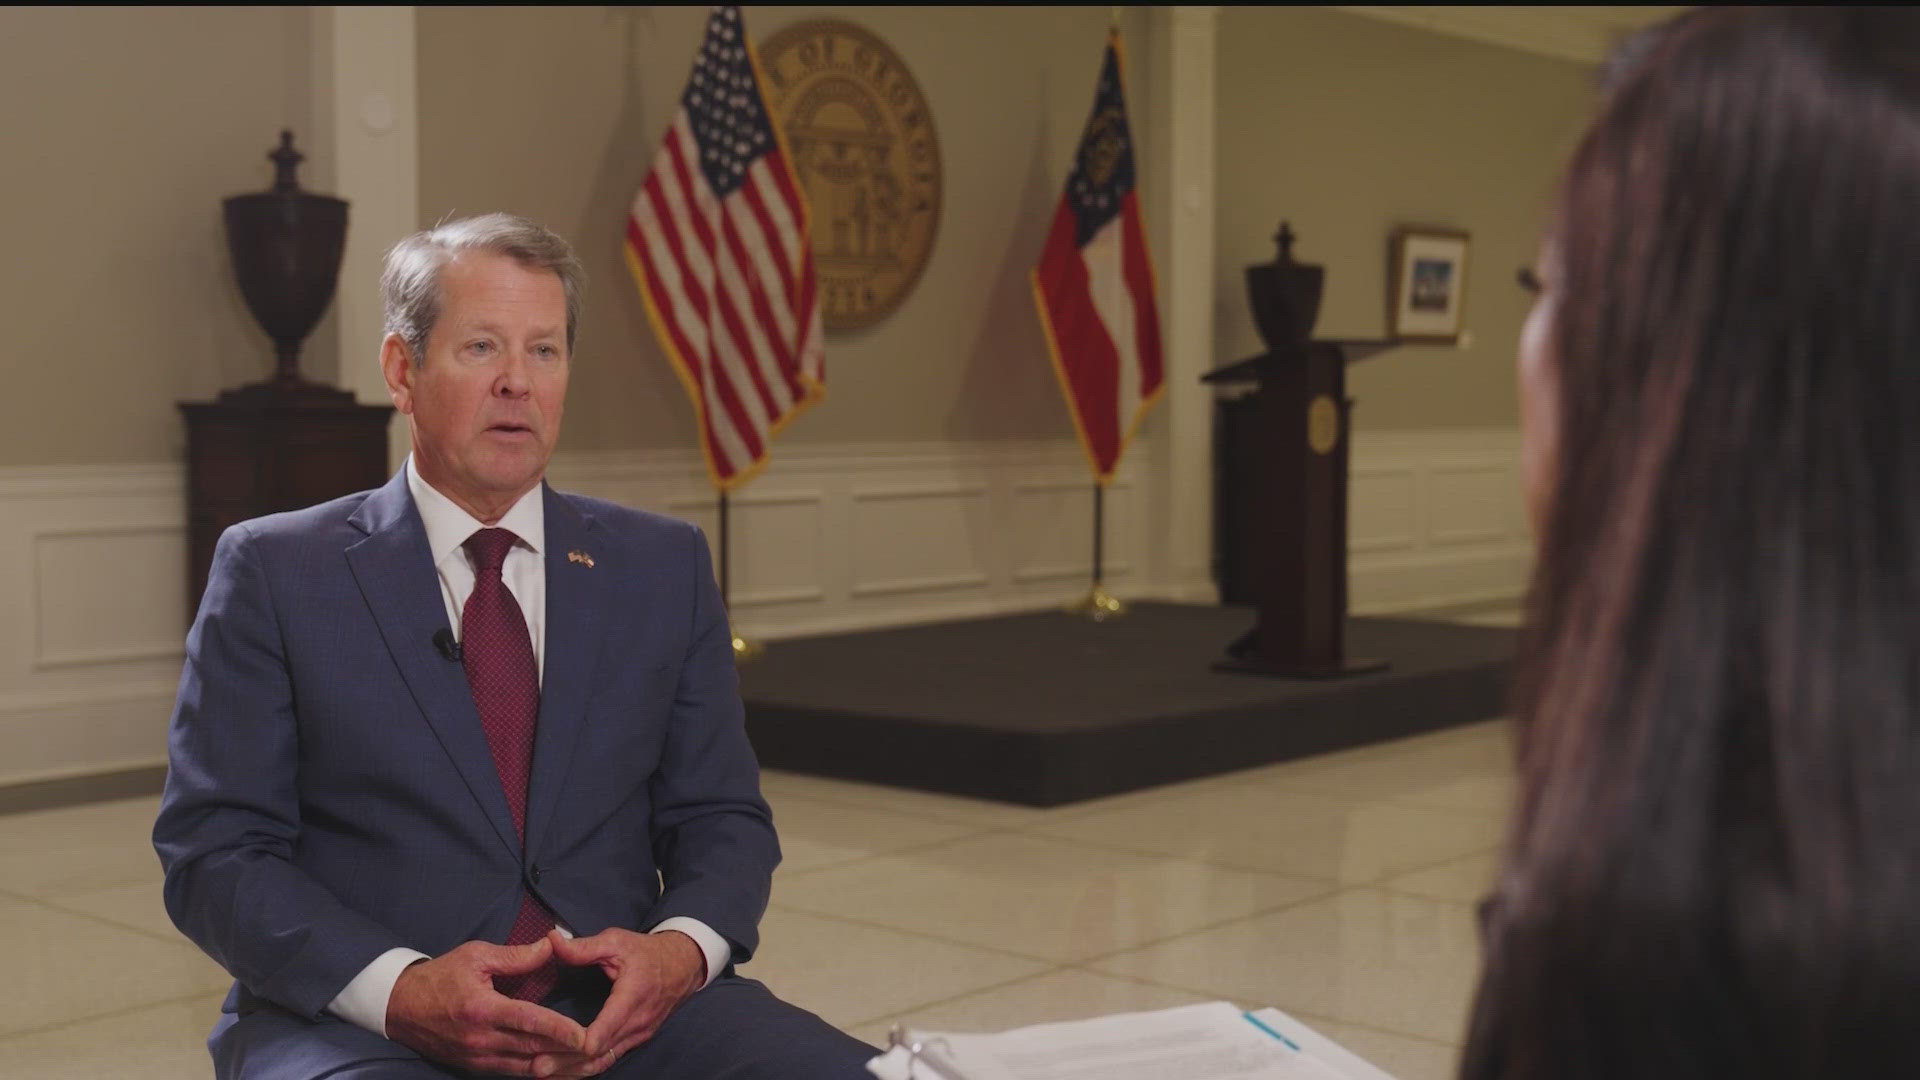 Georgia Gov. Brian Kemp sat down with 11Alive and discussed whether he would be supporting Donald Trump for president amidst their rocky relationship.